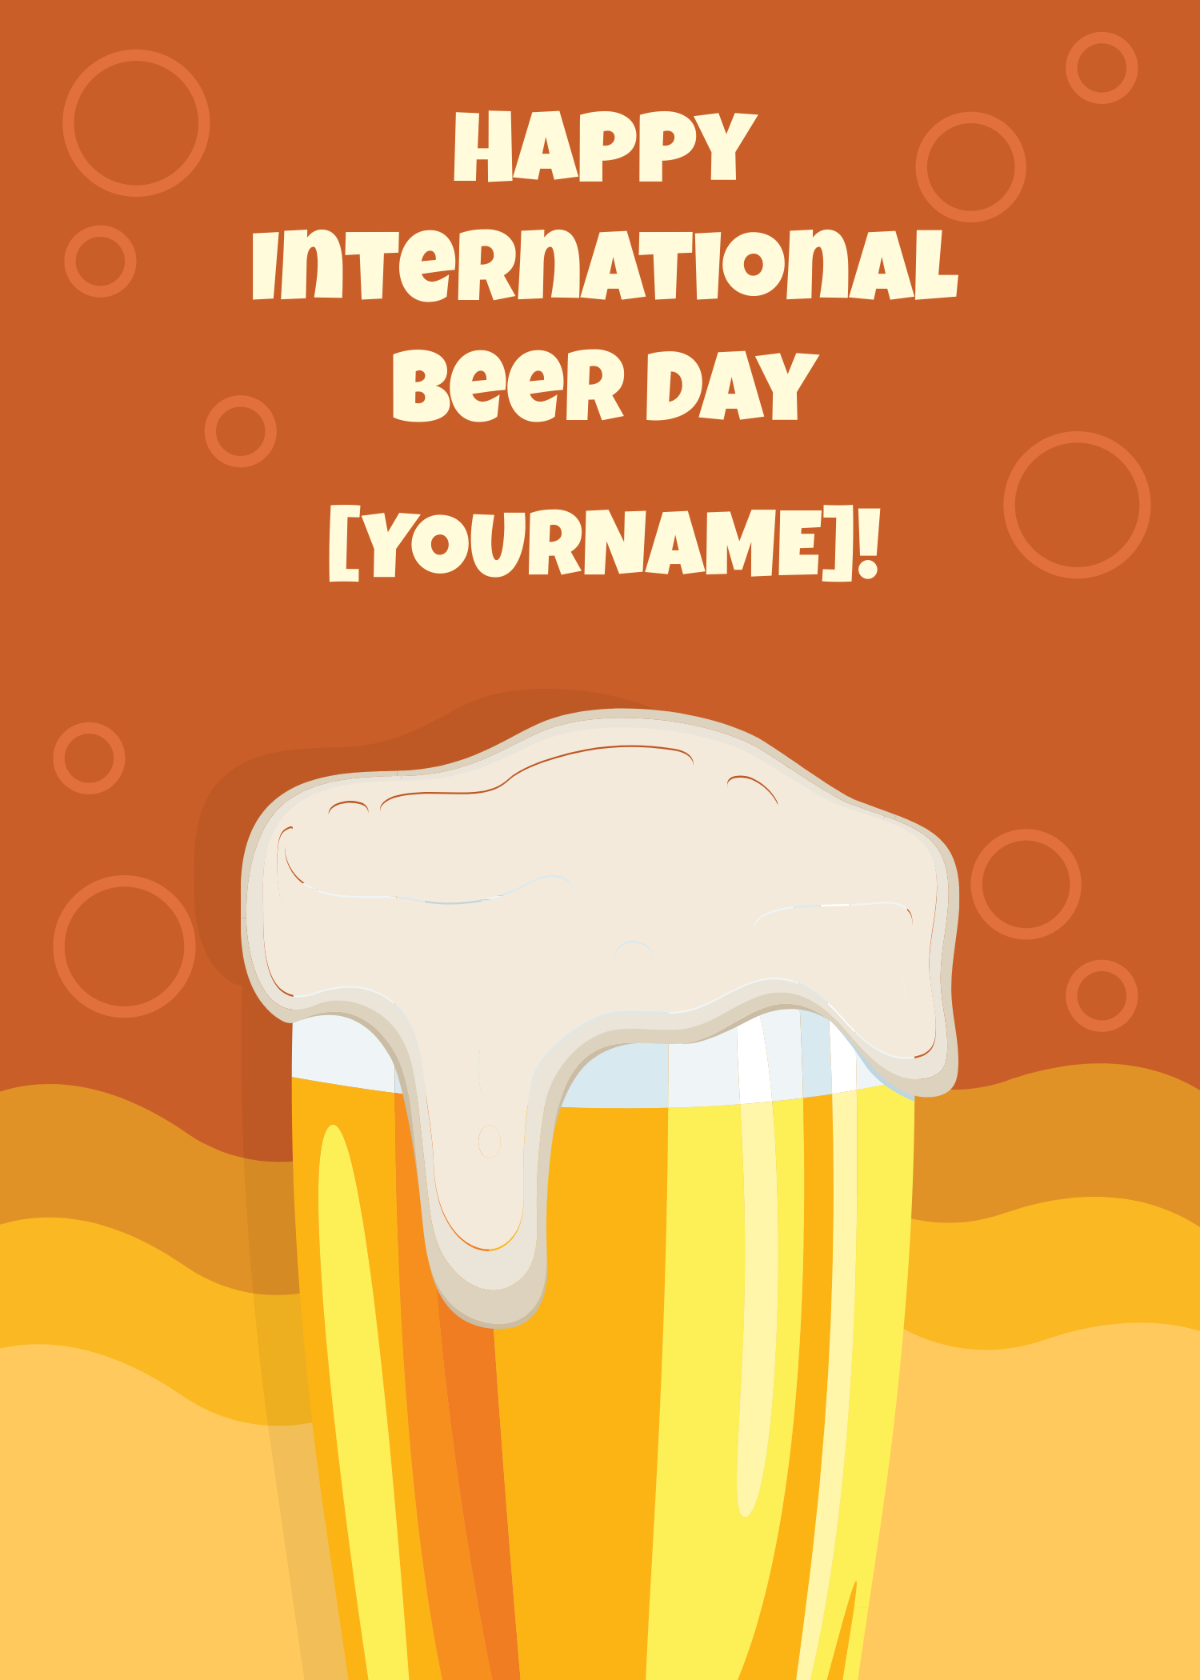 International Beer Day Wishes